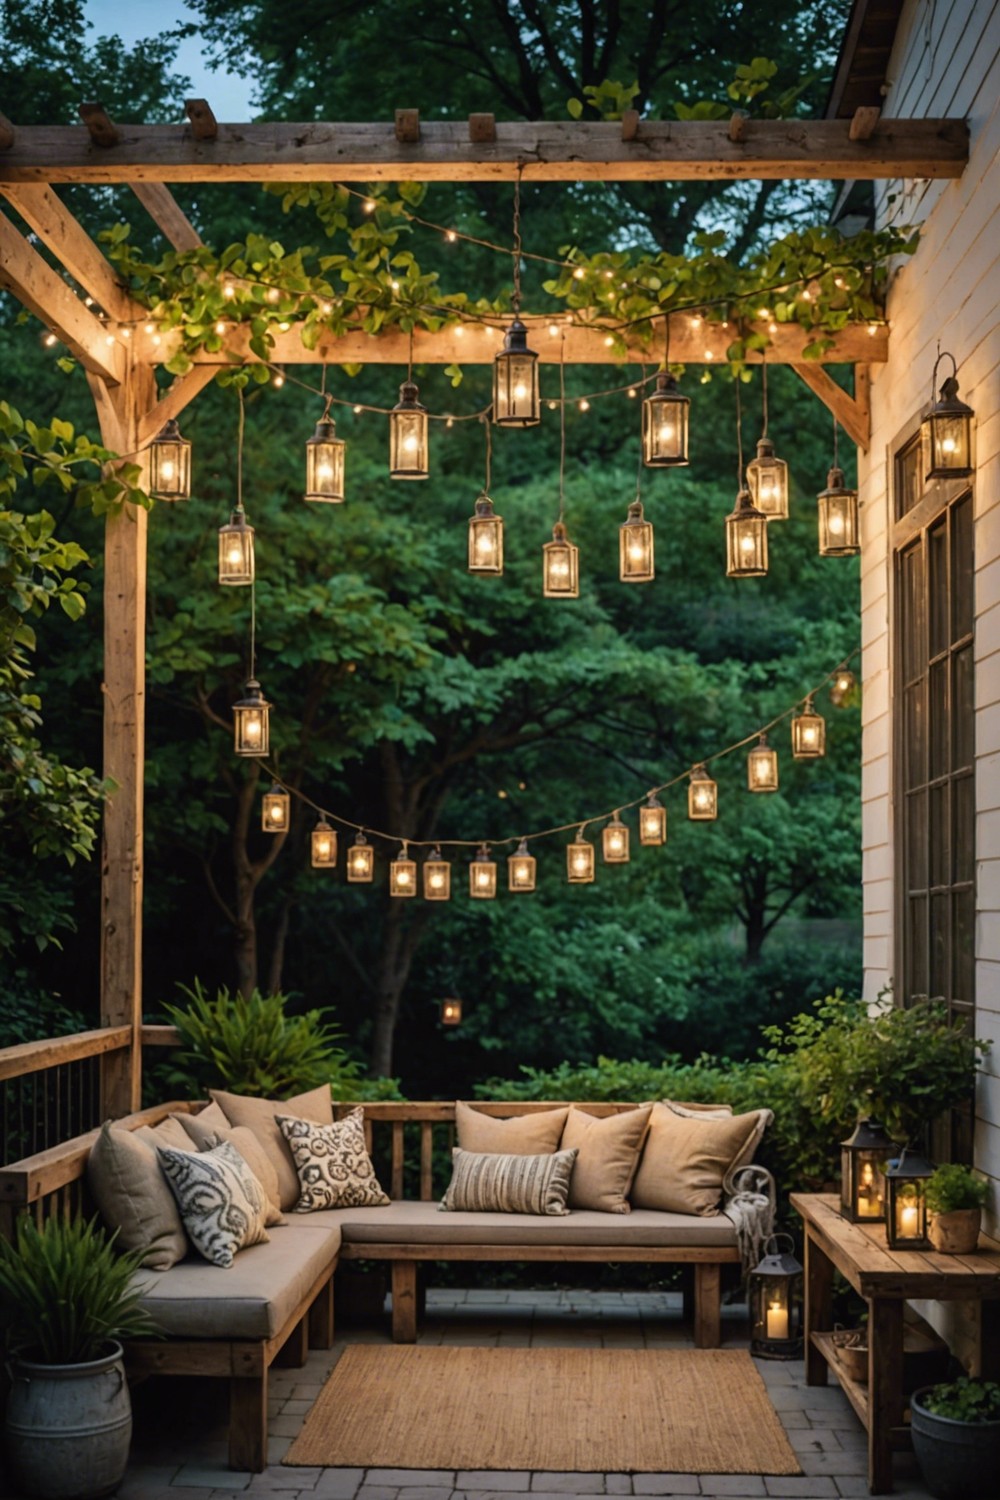 Cozy Outdoor Decor with Rustic Accents